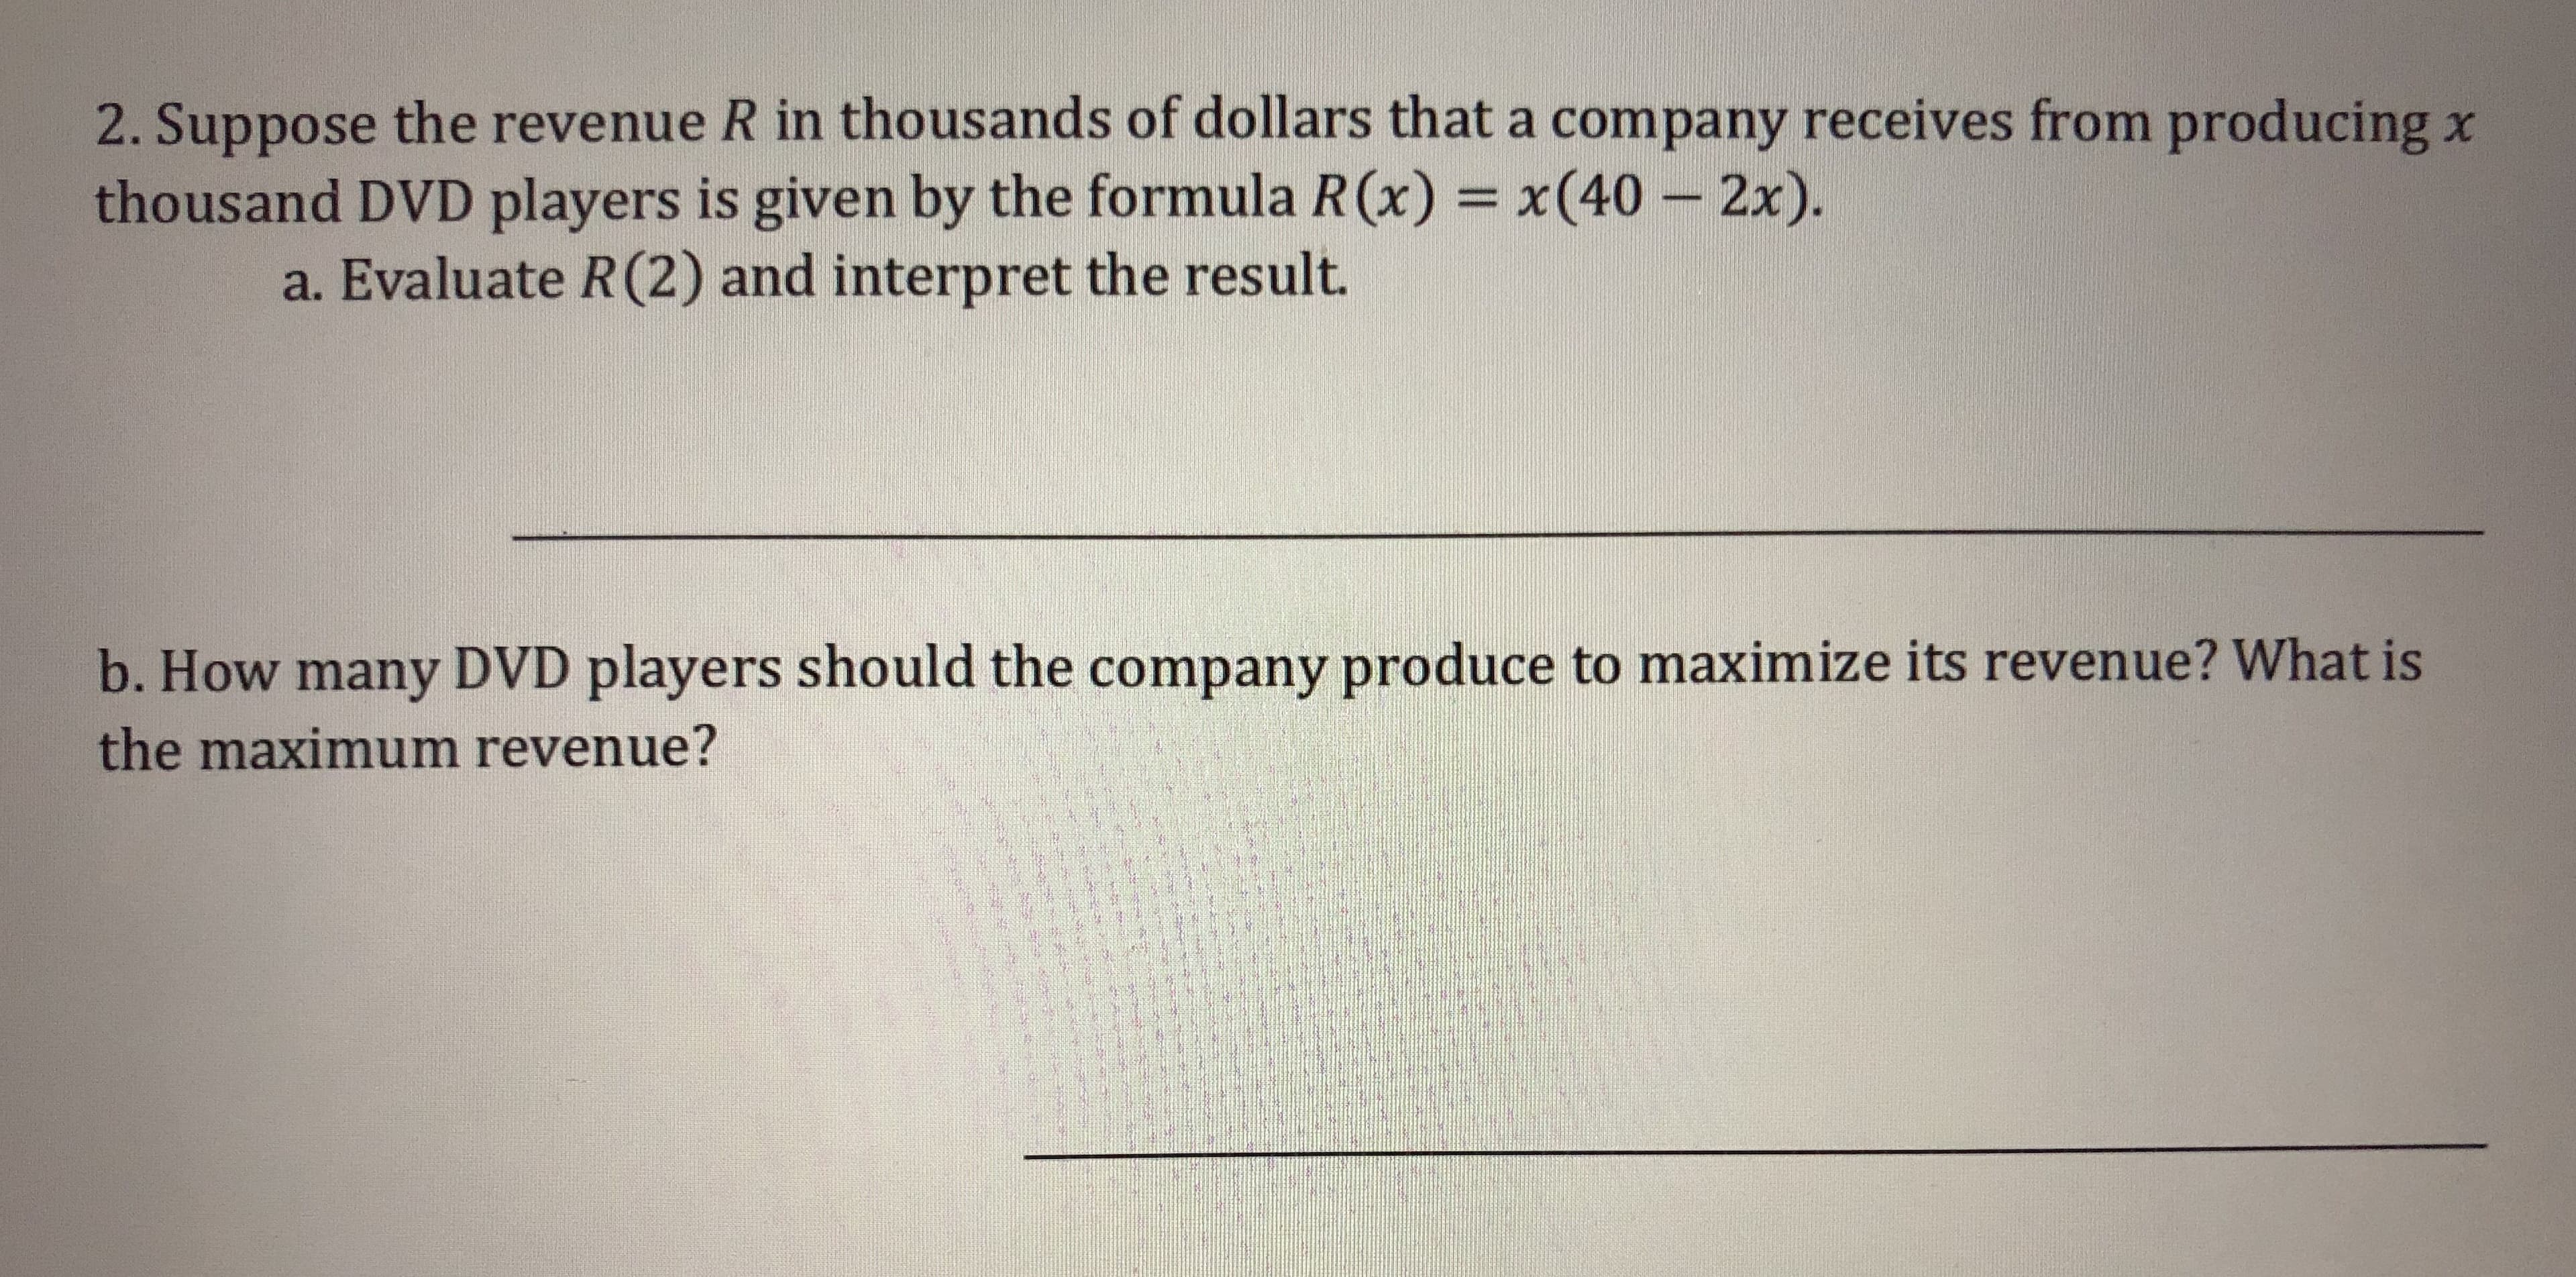 2. Suppose the revenue R in thousands of dollars that a company receives from producing x
thousand DVD players is given by the formula R(x) x(40 -2x).
a. Evaluate R(2) and interpret the result.
b. How many DVD players should the company produce to maximize its revenue? What is
the maximum revenue?
